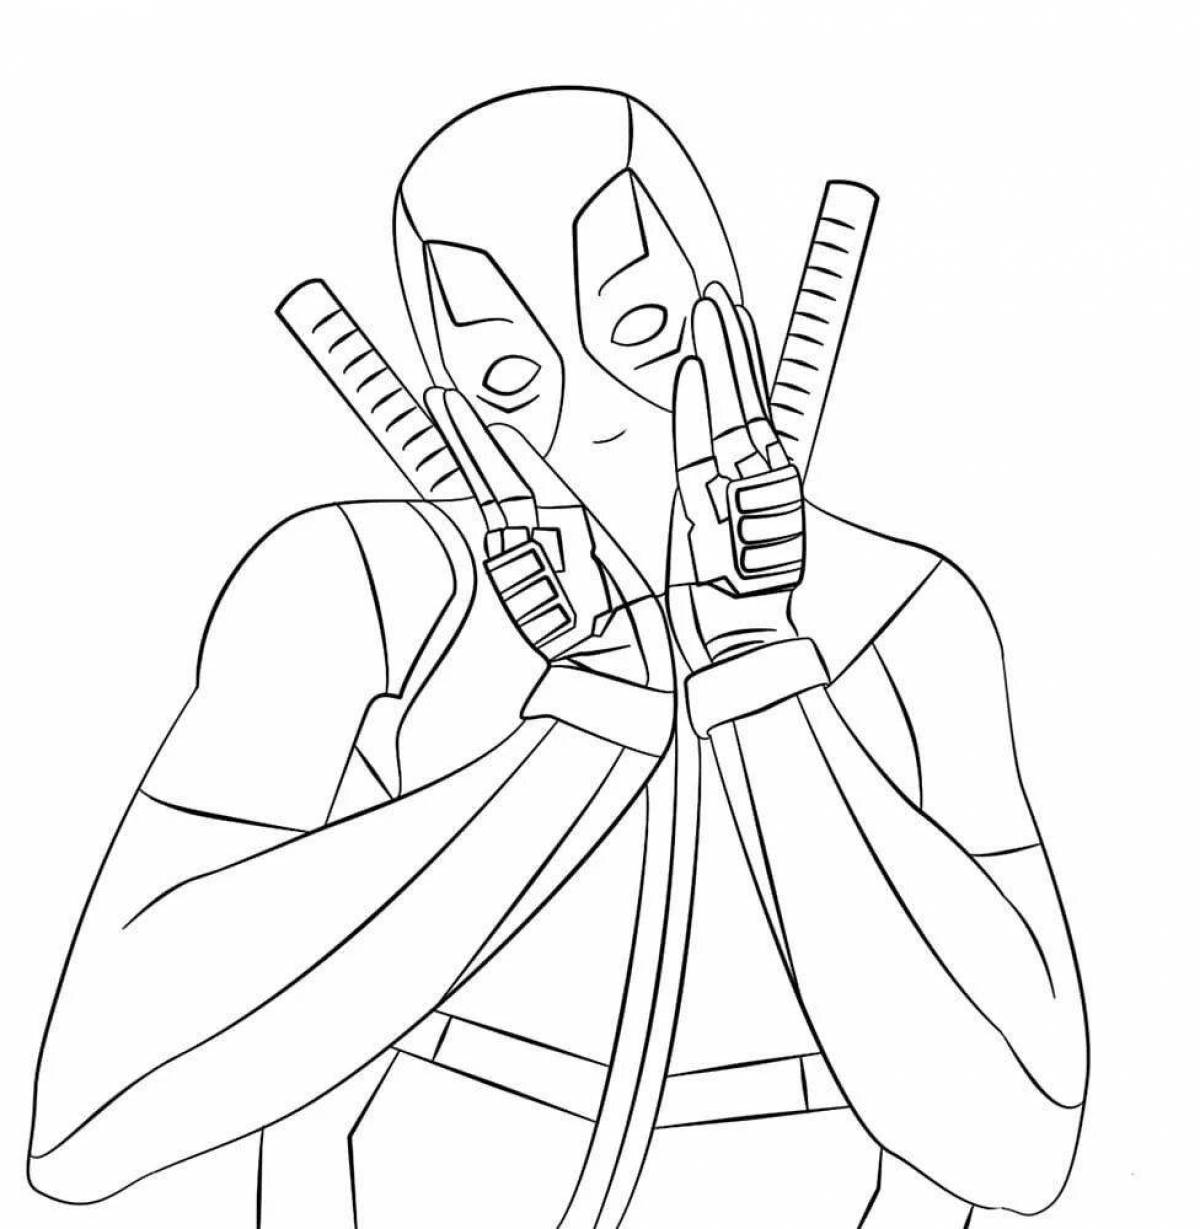 Deadpool's vibrant coloring page